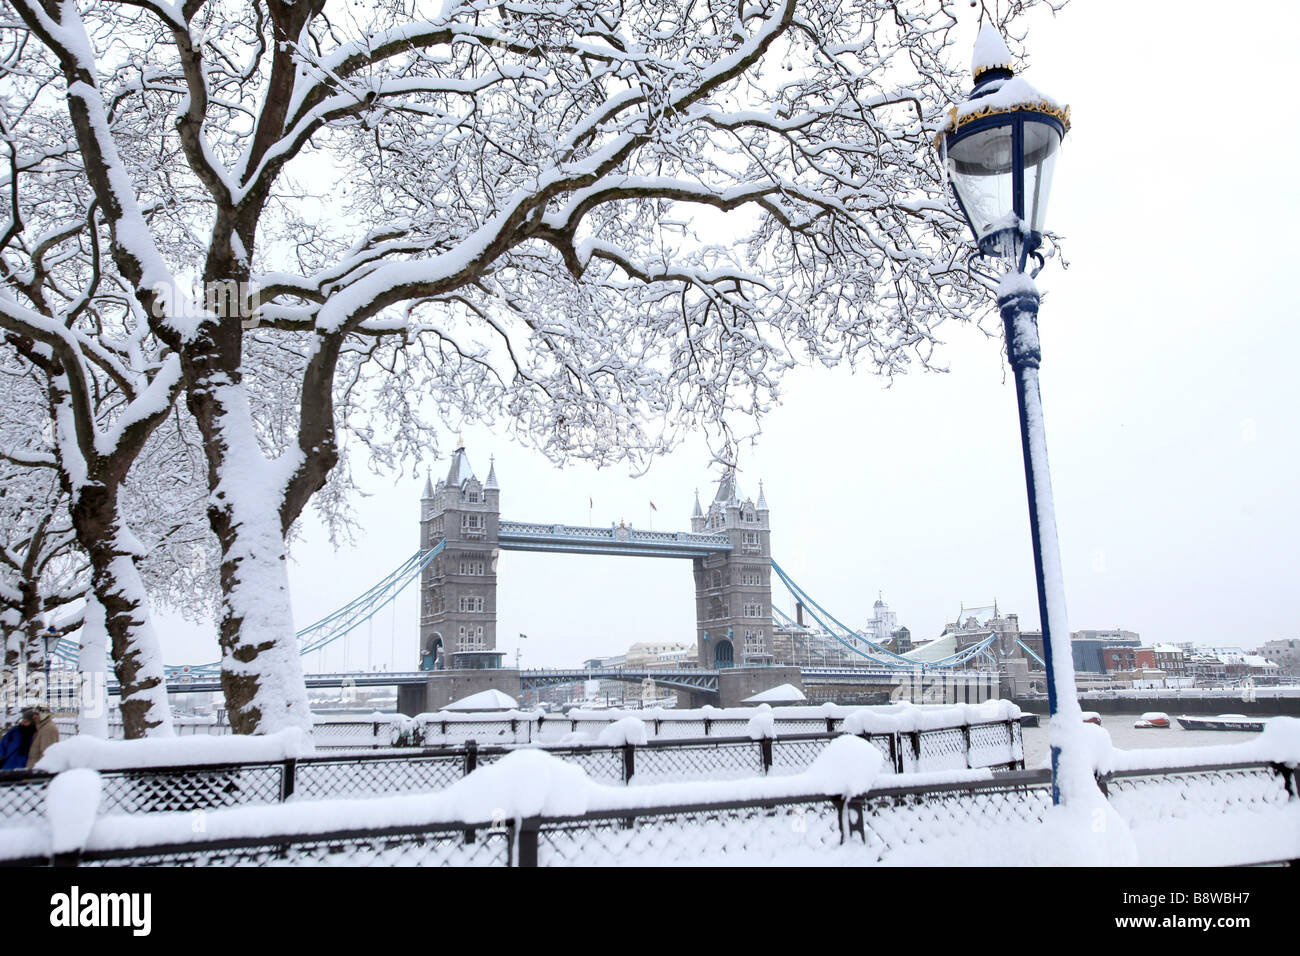 Tower Bridge pictured during snowy weather in London February 2009 Stock Photo